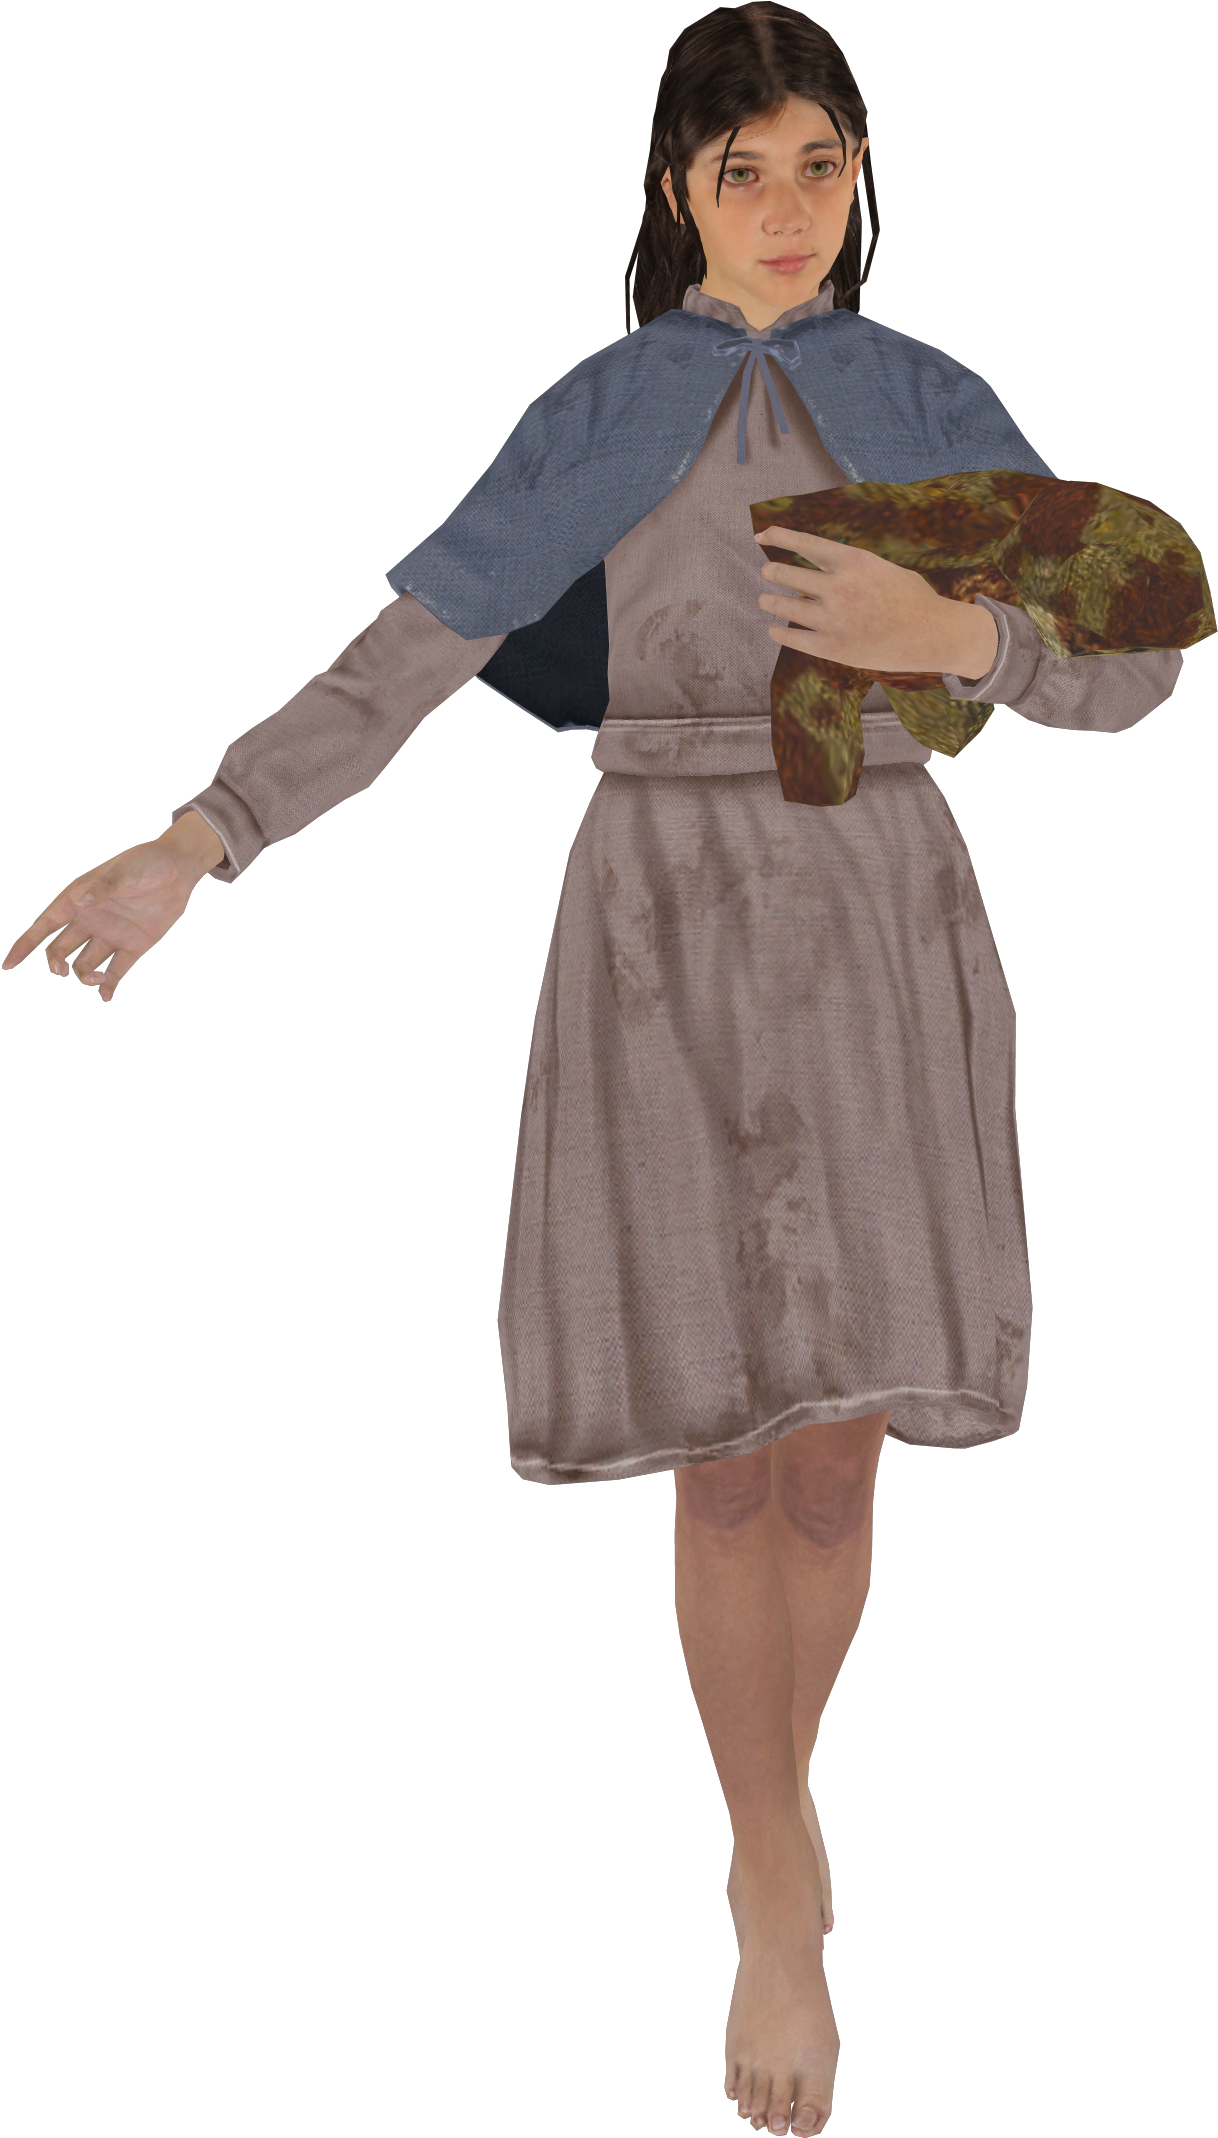 Download Samantha Zombies Png PNG Image with No Background - PNGkey.com